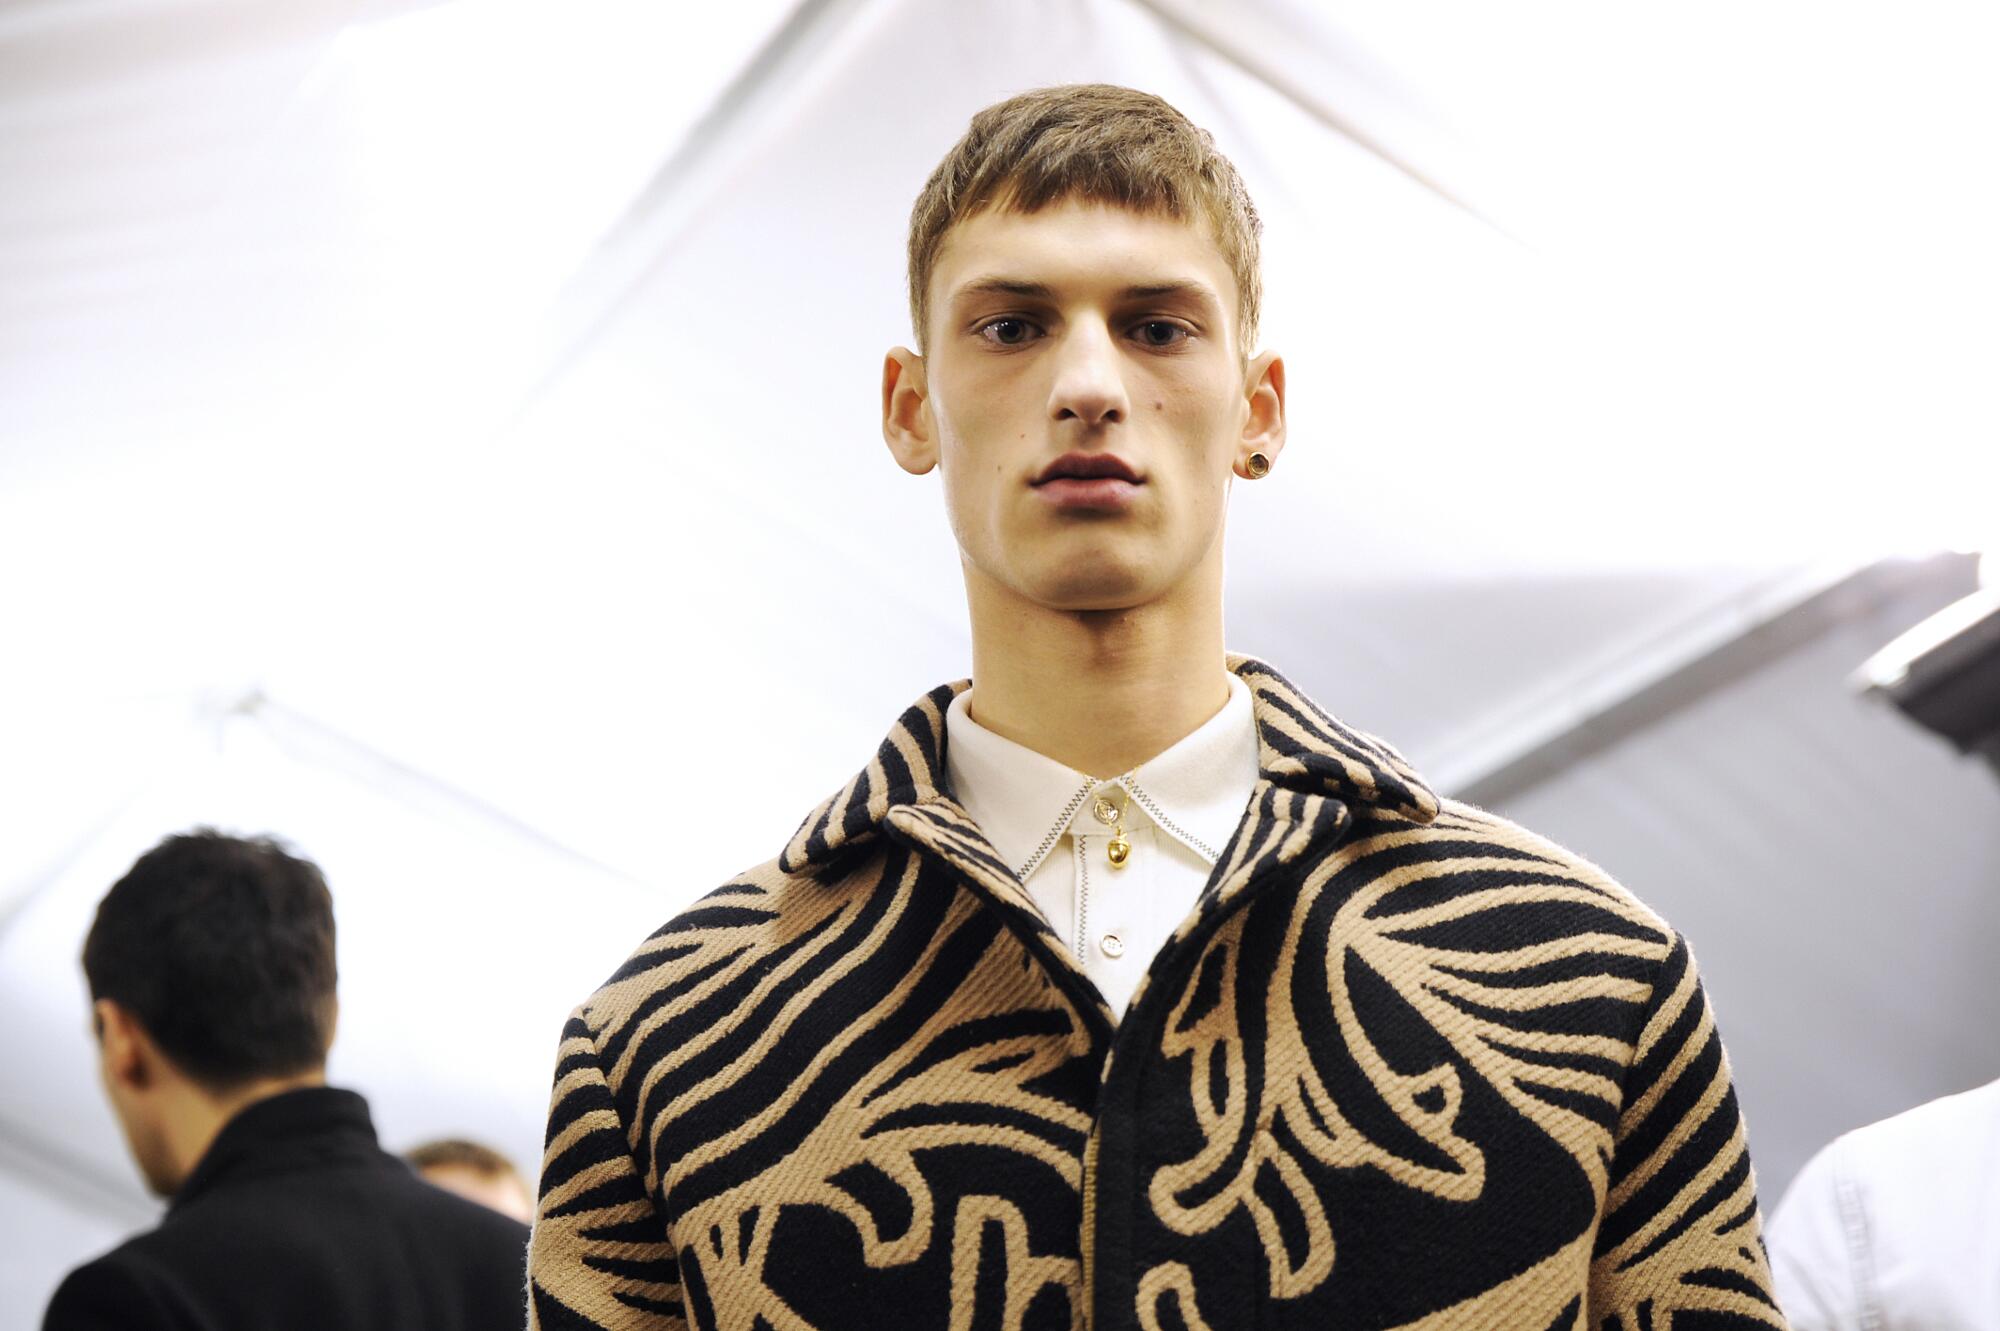 Louis Vuitton FW18 Menswear Collection: Swagger's Picks for the Modern Man  - SWAGGER Magazine